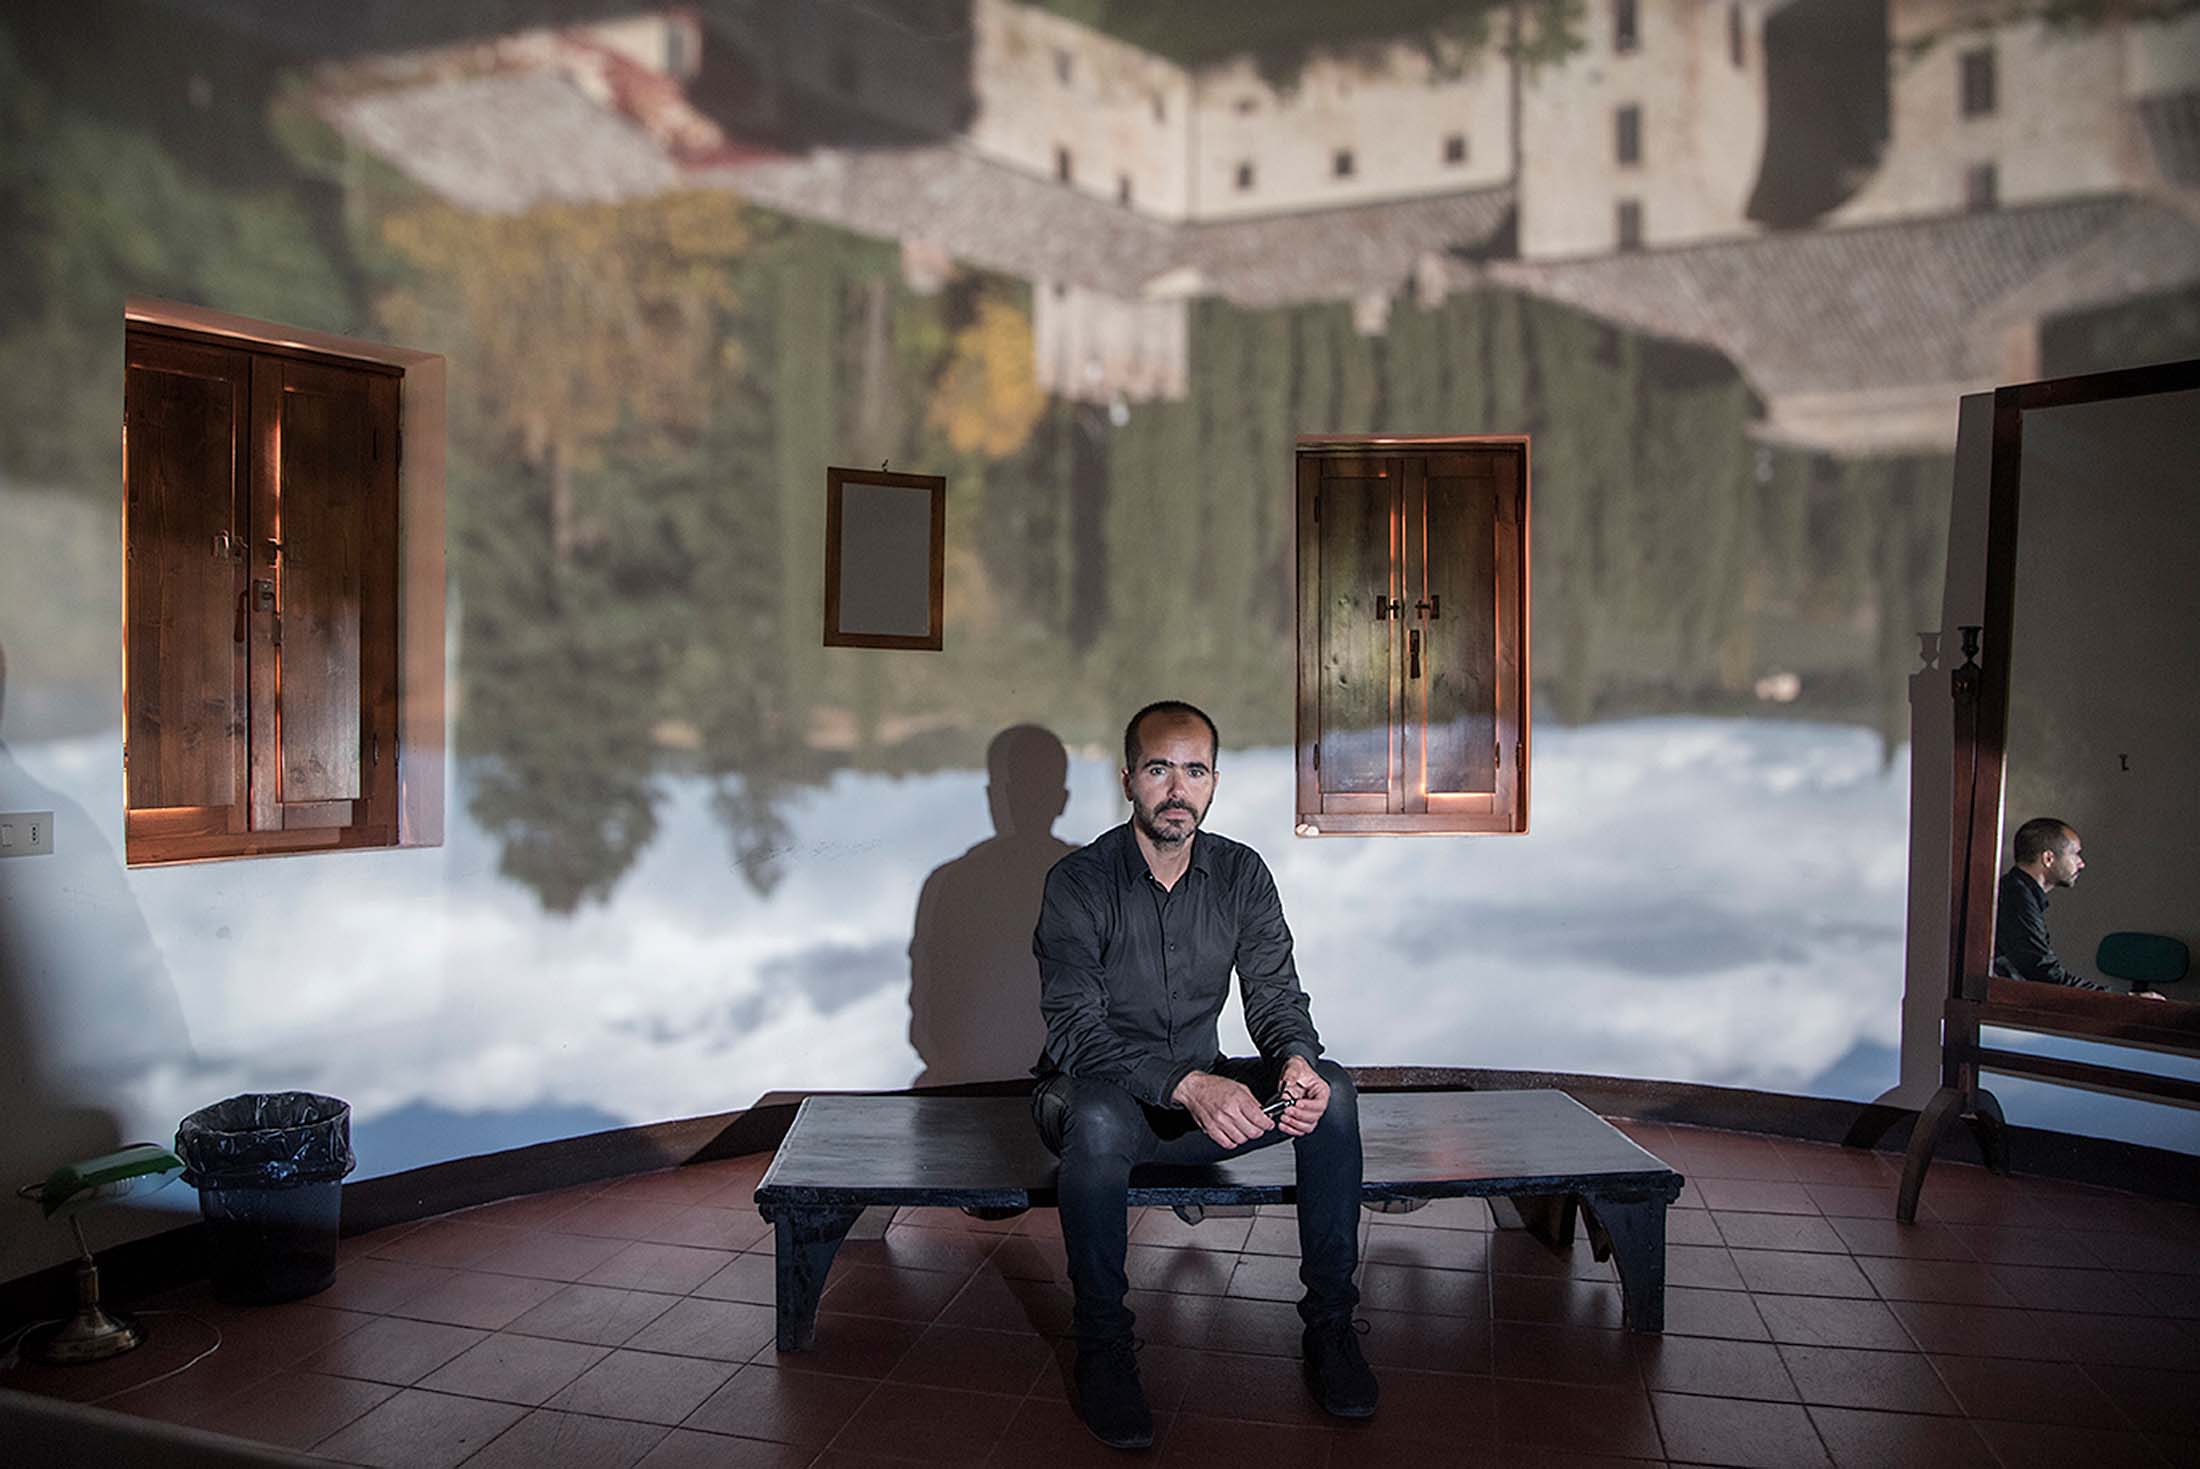 A man sits on a bench in a bare room with a sky and forest projected onto the walls